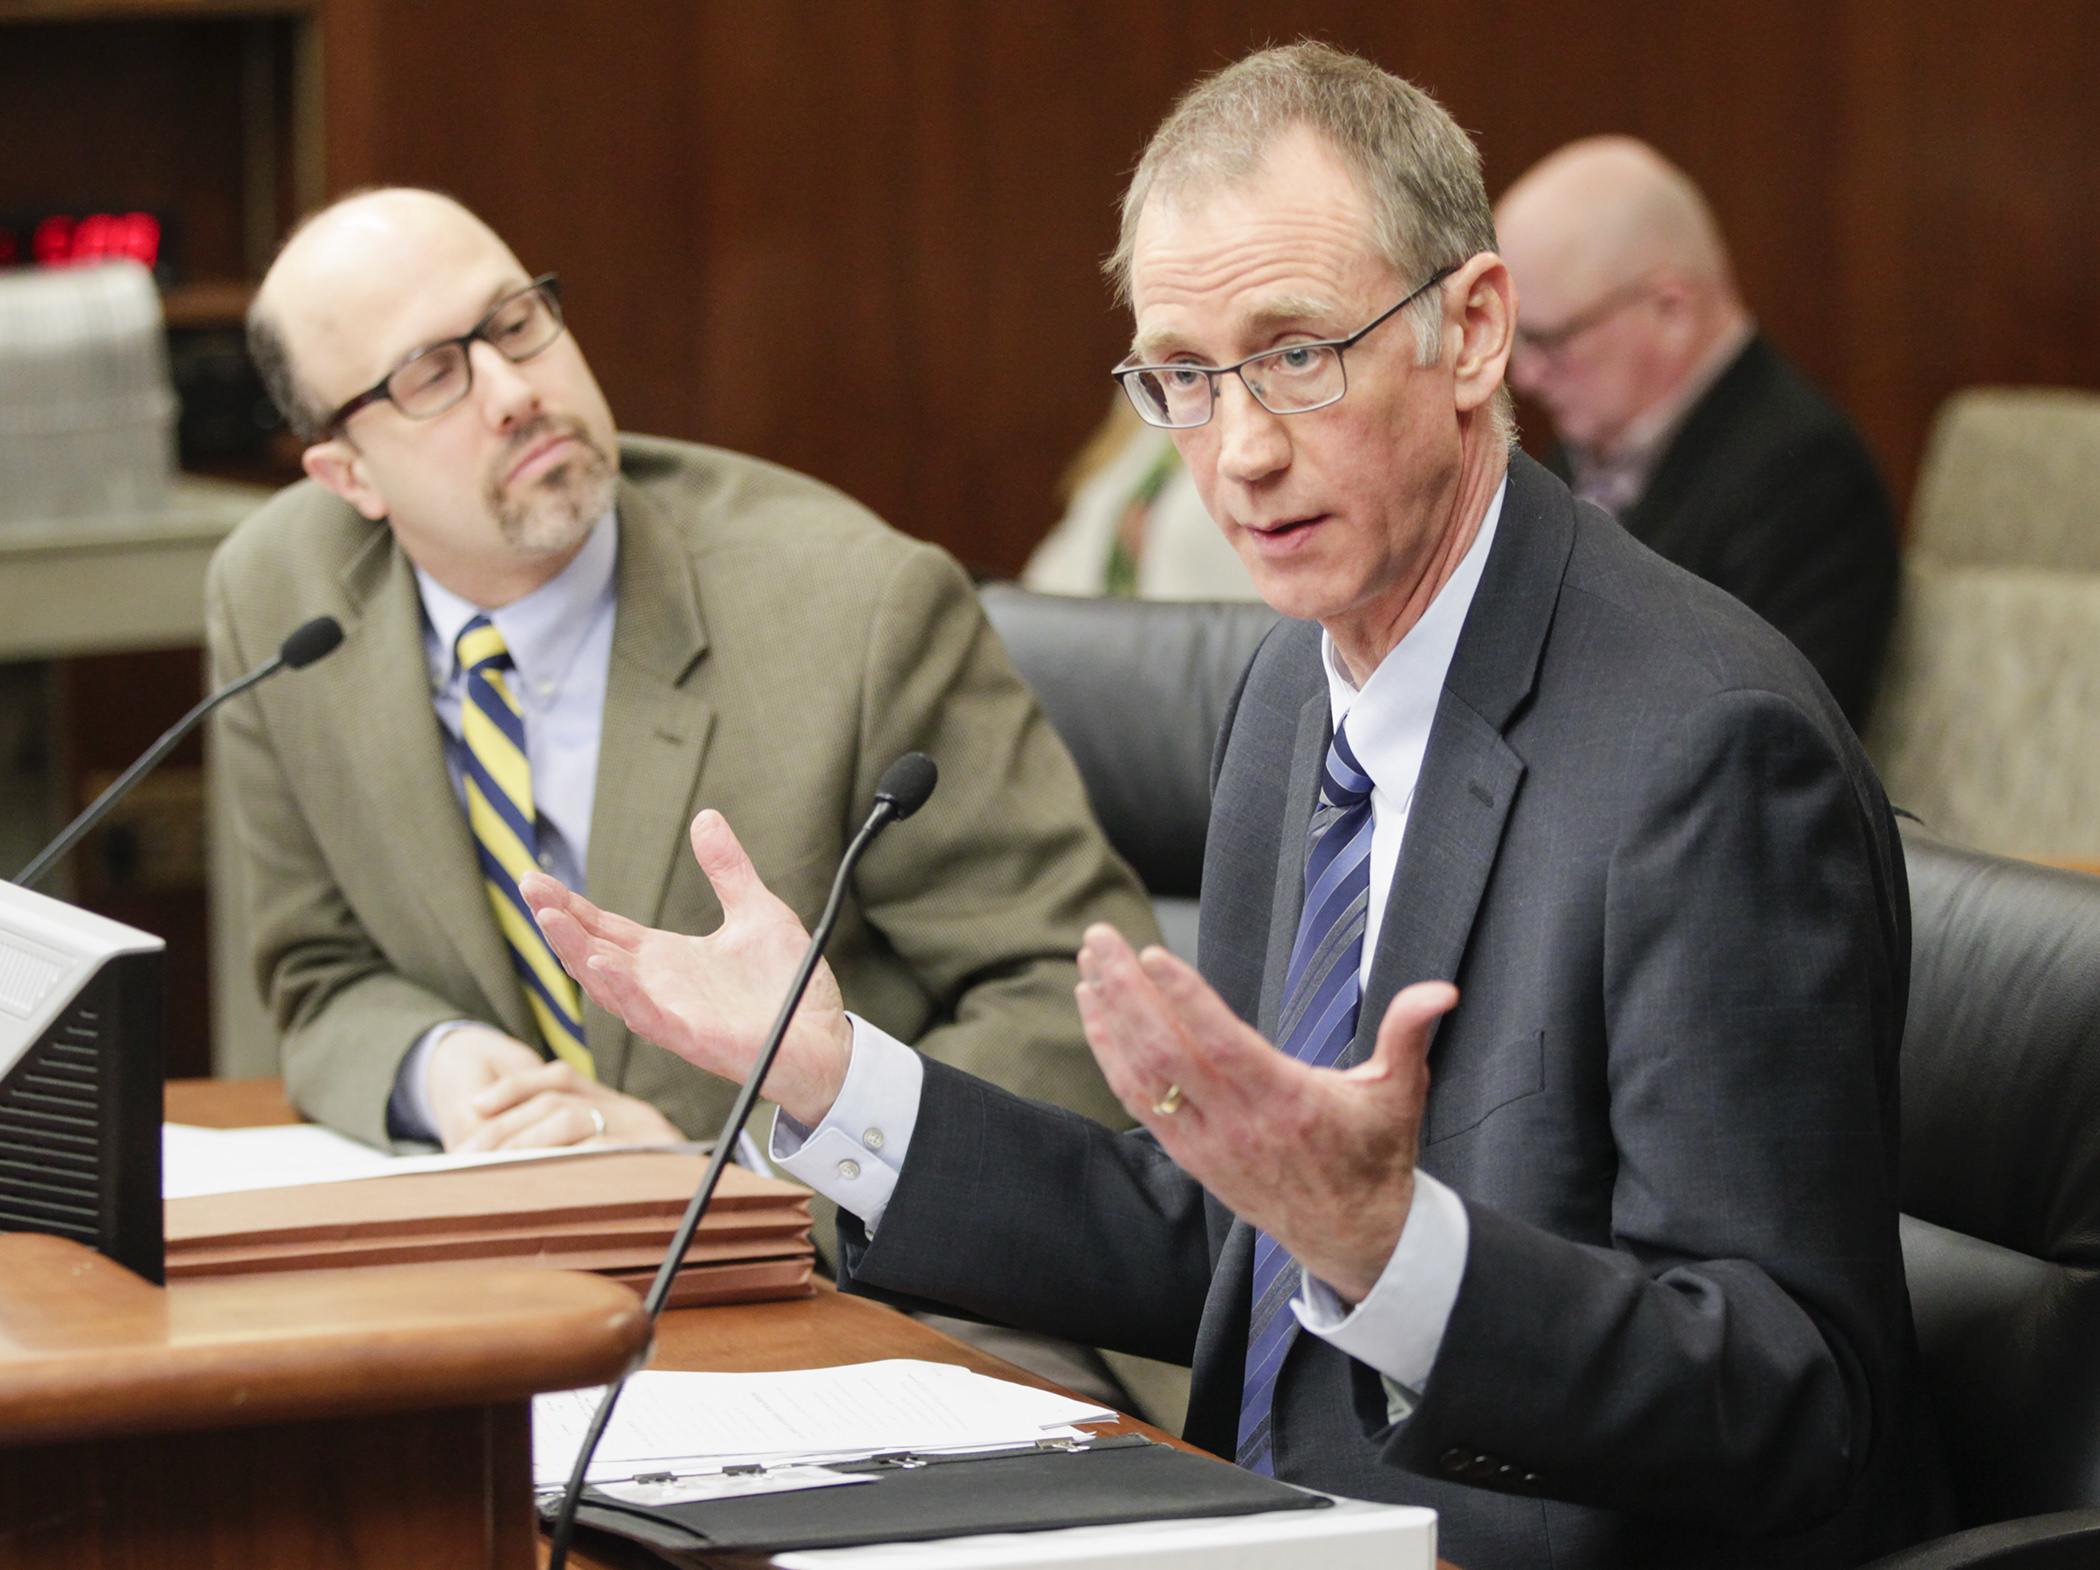 Deputy Human Services Commissioner Chuck Johnson testifies before the House Judiciary Finance and Civil Law Division on HF2319, sponsored by Rep. Dave Pinto, left. Photo by Paul Battaglia